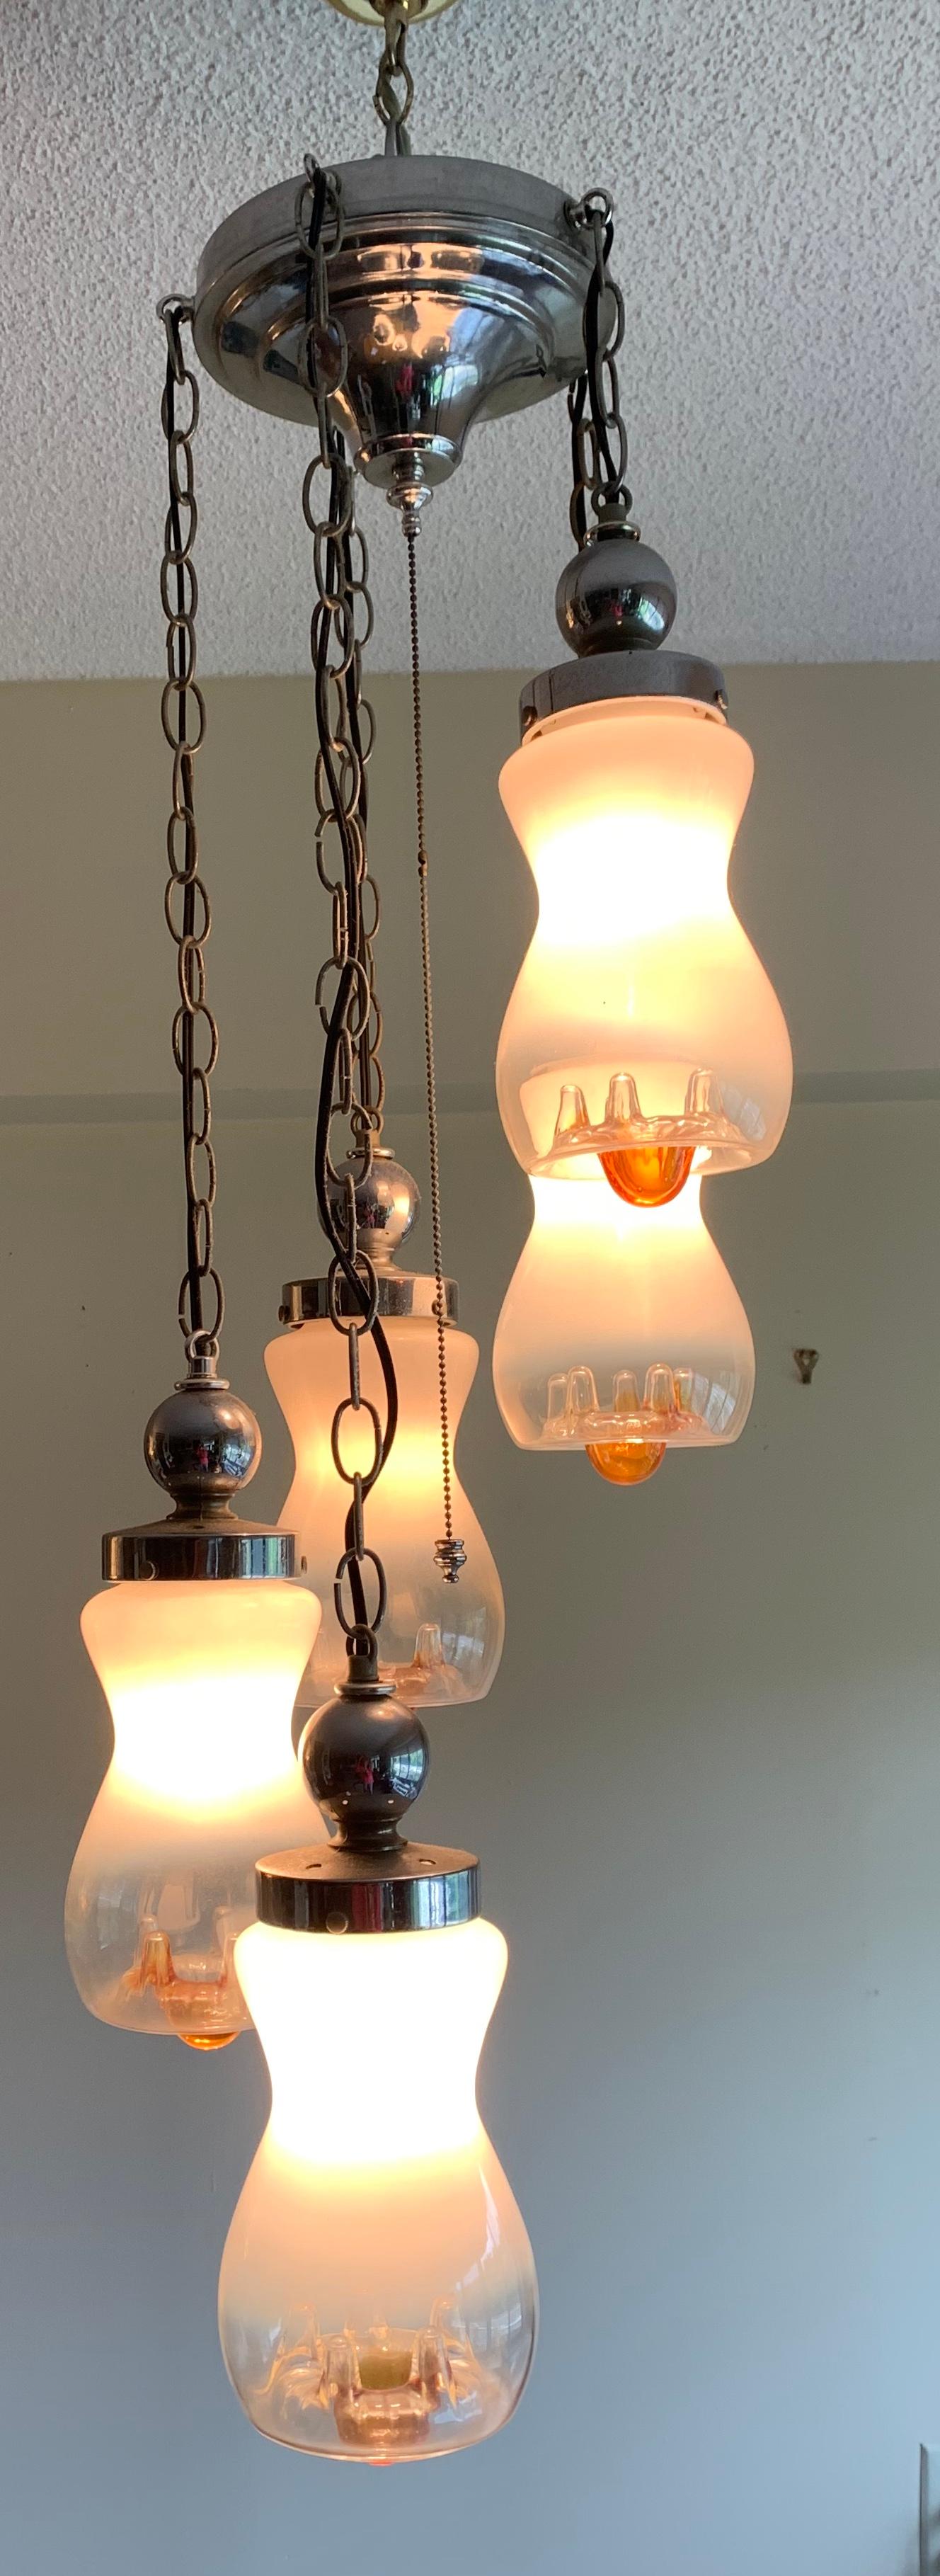 Cascading graduated midcentury Italian light fixture with 5 hand blown glass globes. Globes have amber drippings. 3-way switch lights one, two or all 5 pendants. Chrome holders and canopy. Opaline and amber creates enhancing accents adding tranquil